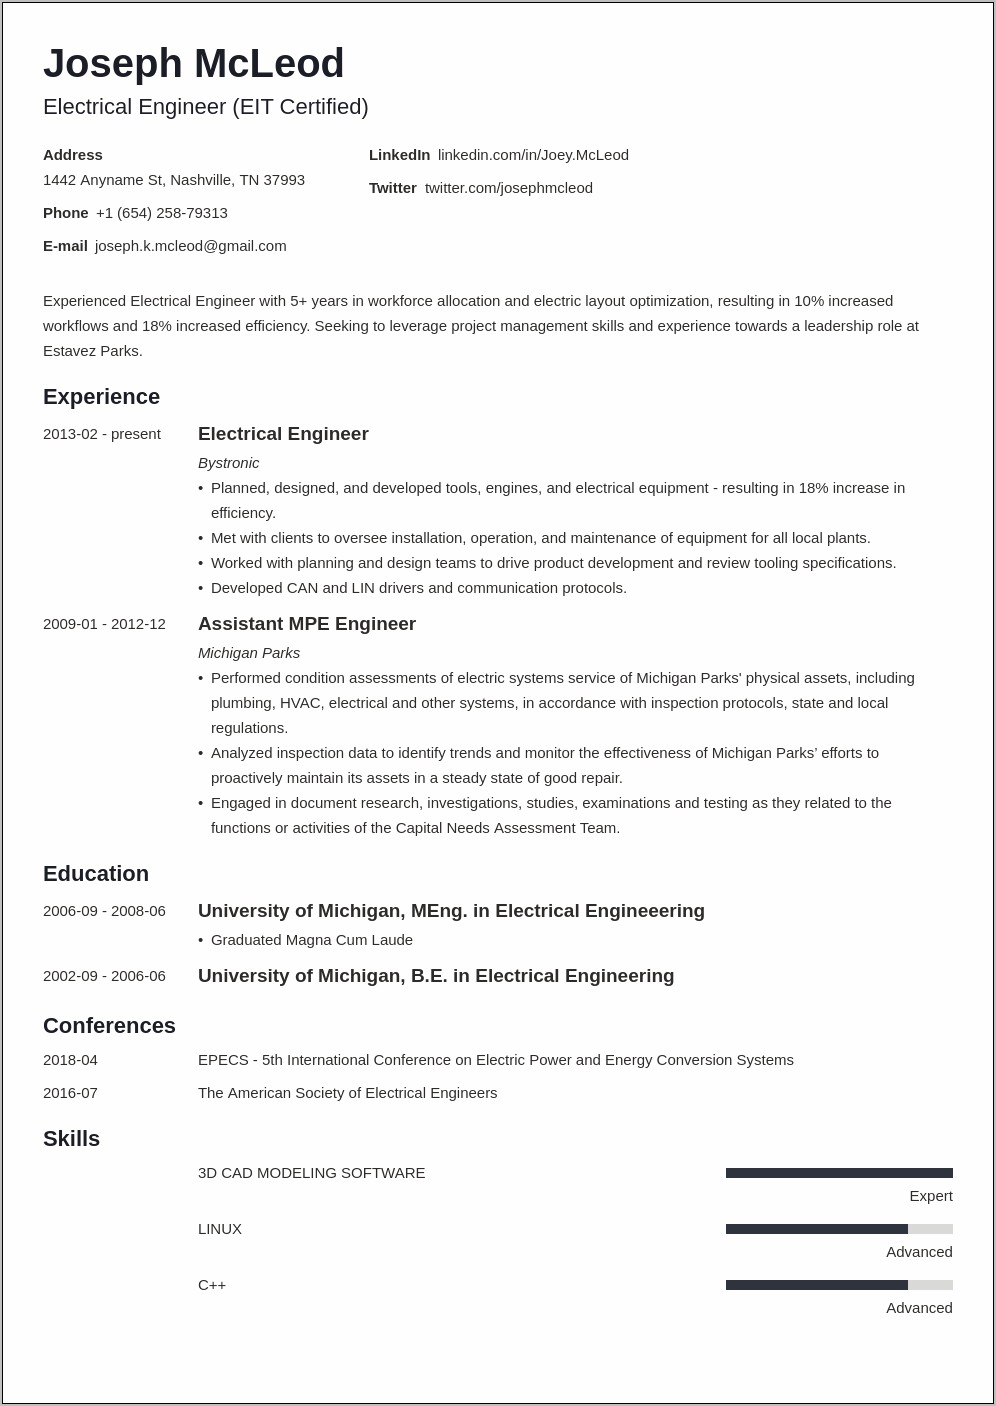 Resume Objective For Electrical Project Engineer